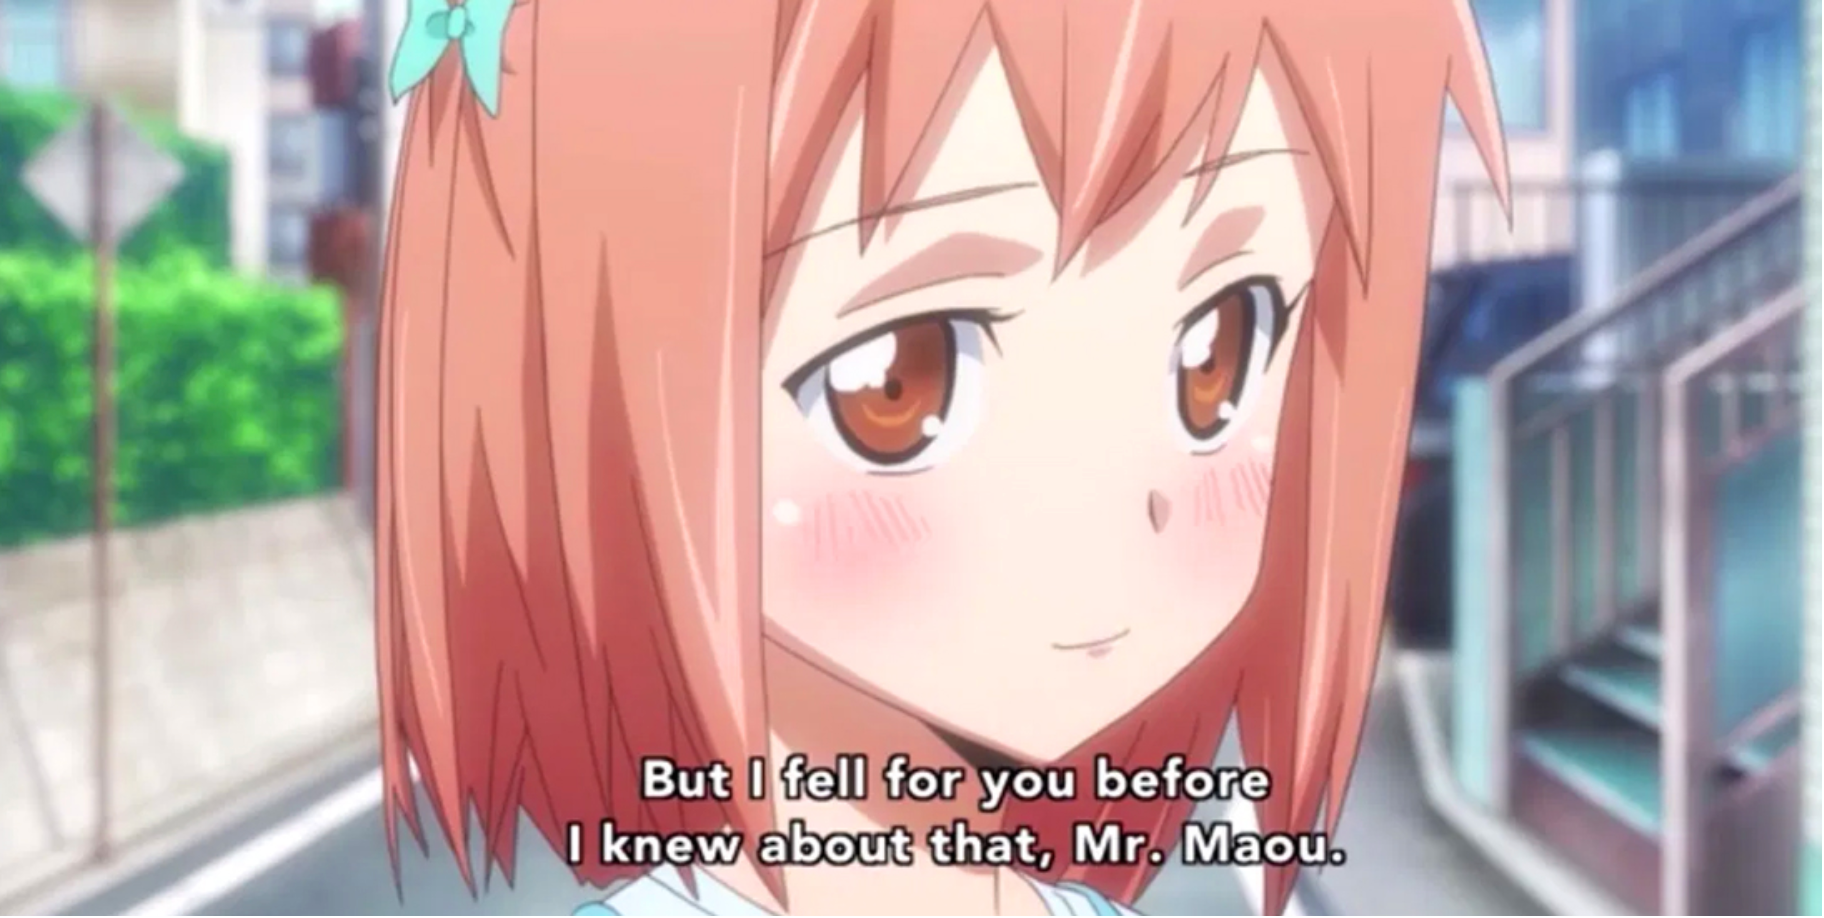 chiho confessing her feelings